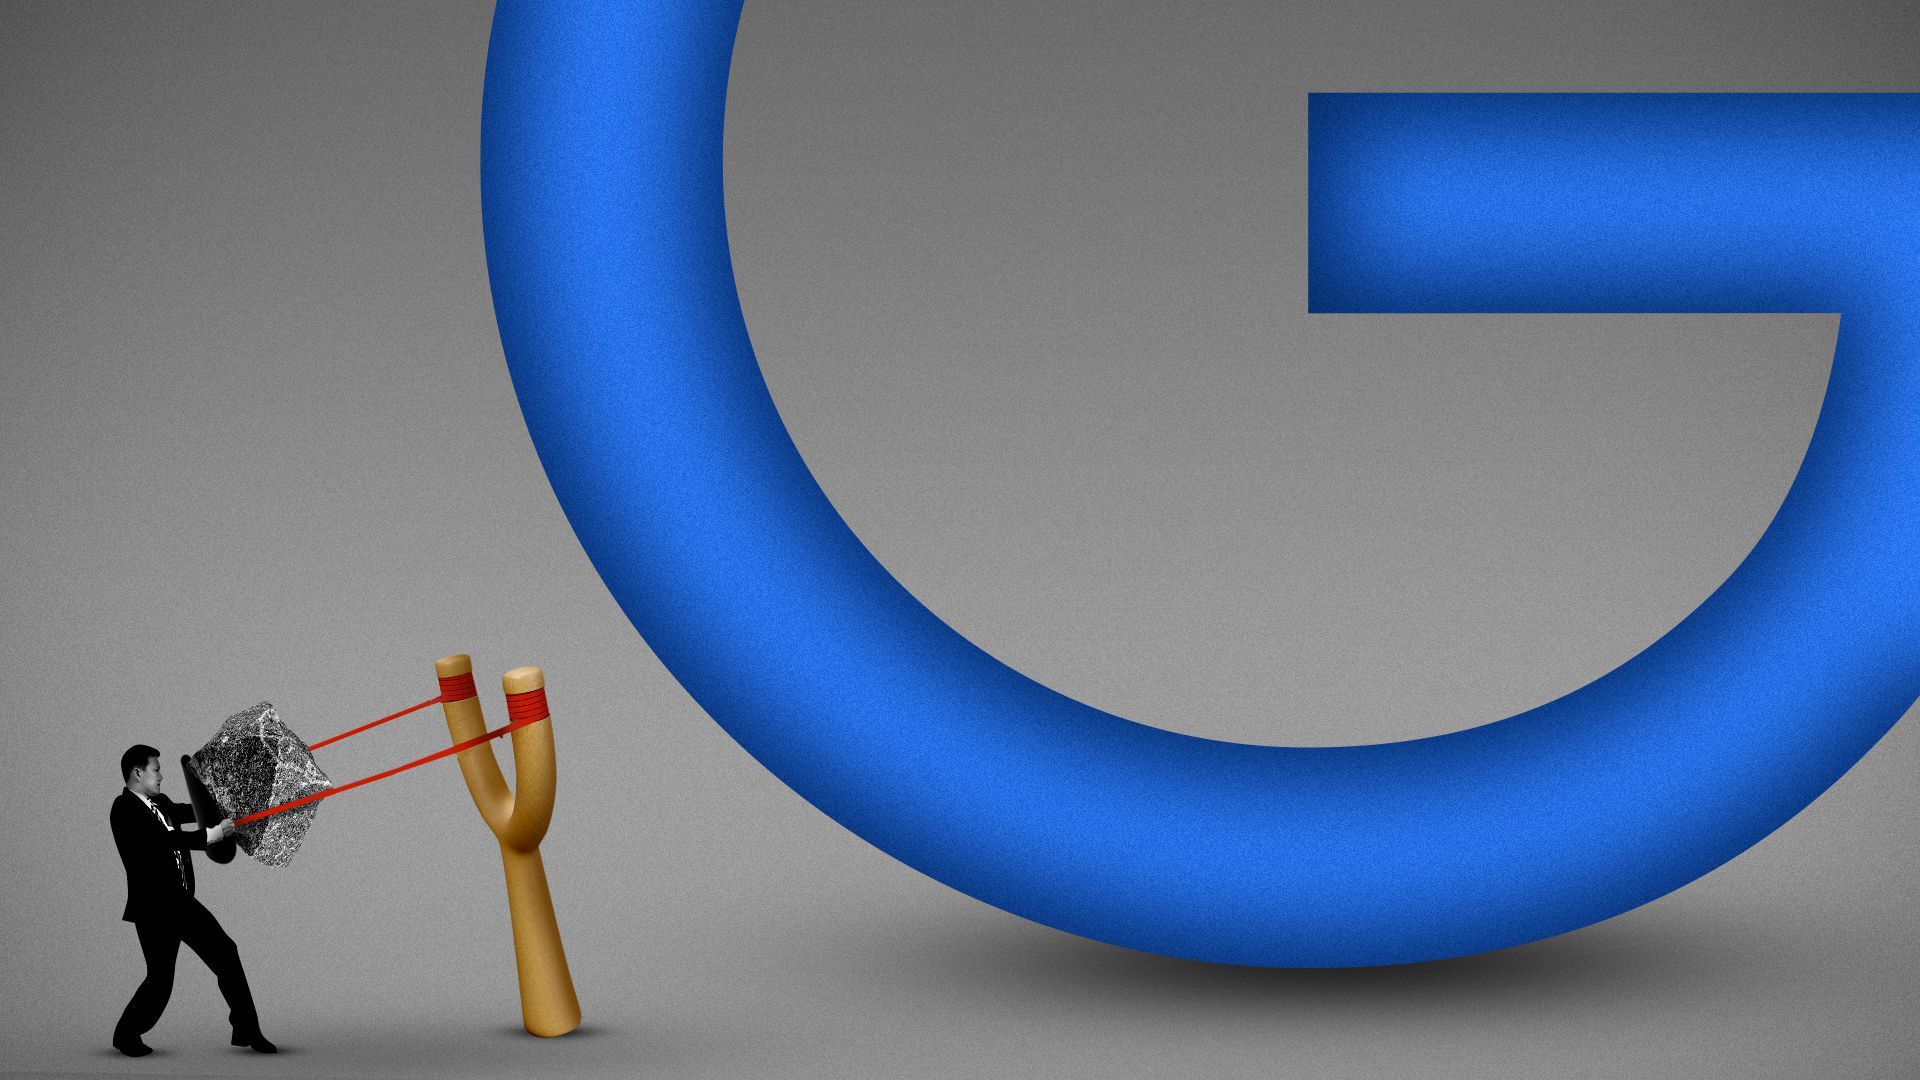 Illustration of a giant Google logo next to a small person pulling a slingshot aiming at the logo. 